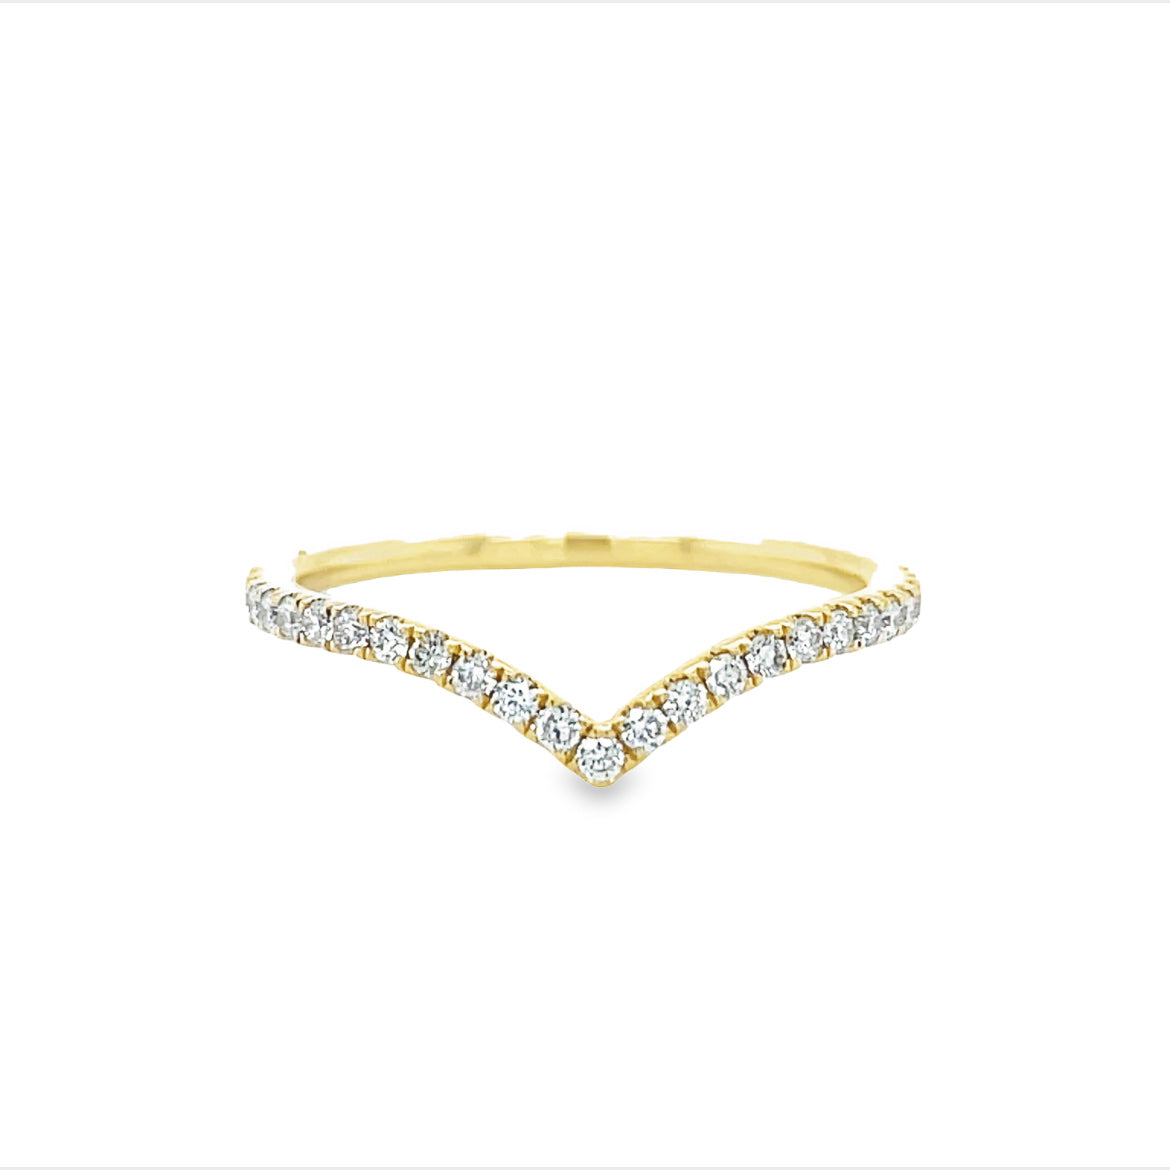 Beautiful, stackable 18k yellow gold ring! Bezel-set with dazzling 0.22 ct diamonds around a 1.6 mm band; the style and elegance will enthrall your senses. Size 6 (resizable).